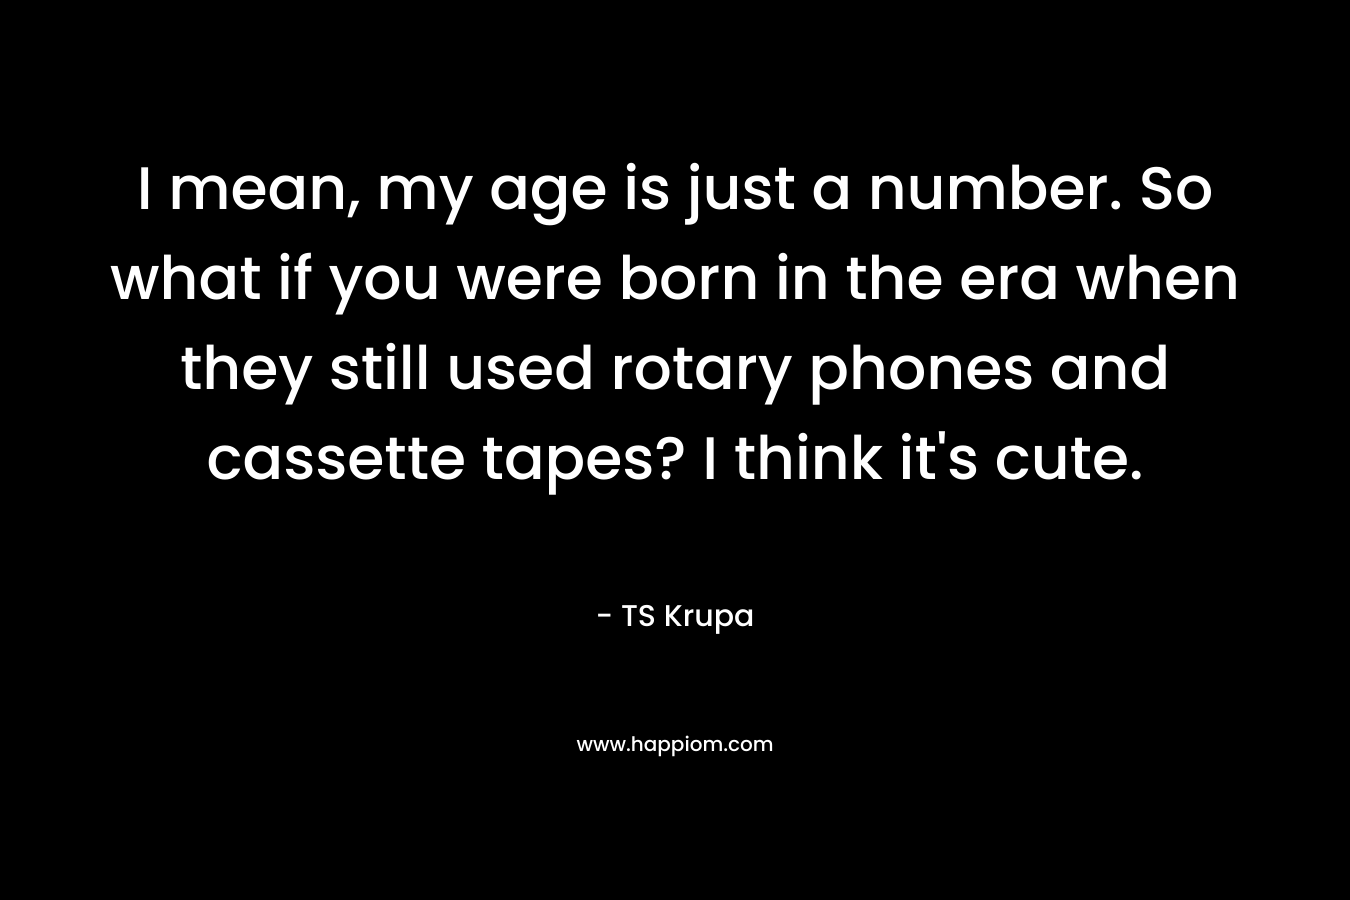 I mean, my age is just a number. So what if you were born in the era when they still used rotary phones and cassette tapes? I think it’s cute. – TS Krupa